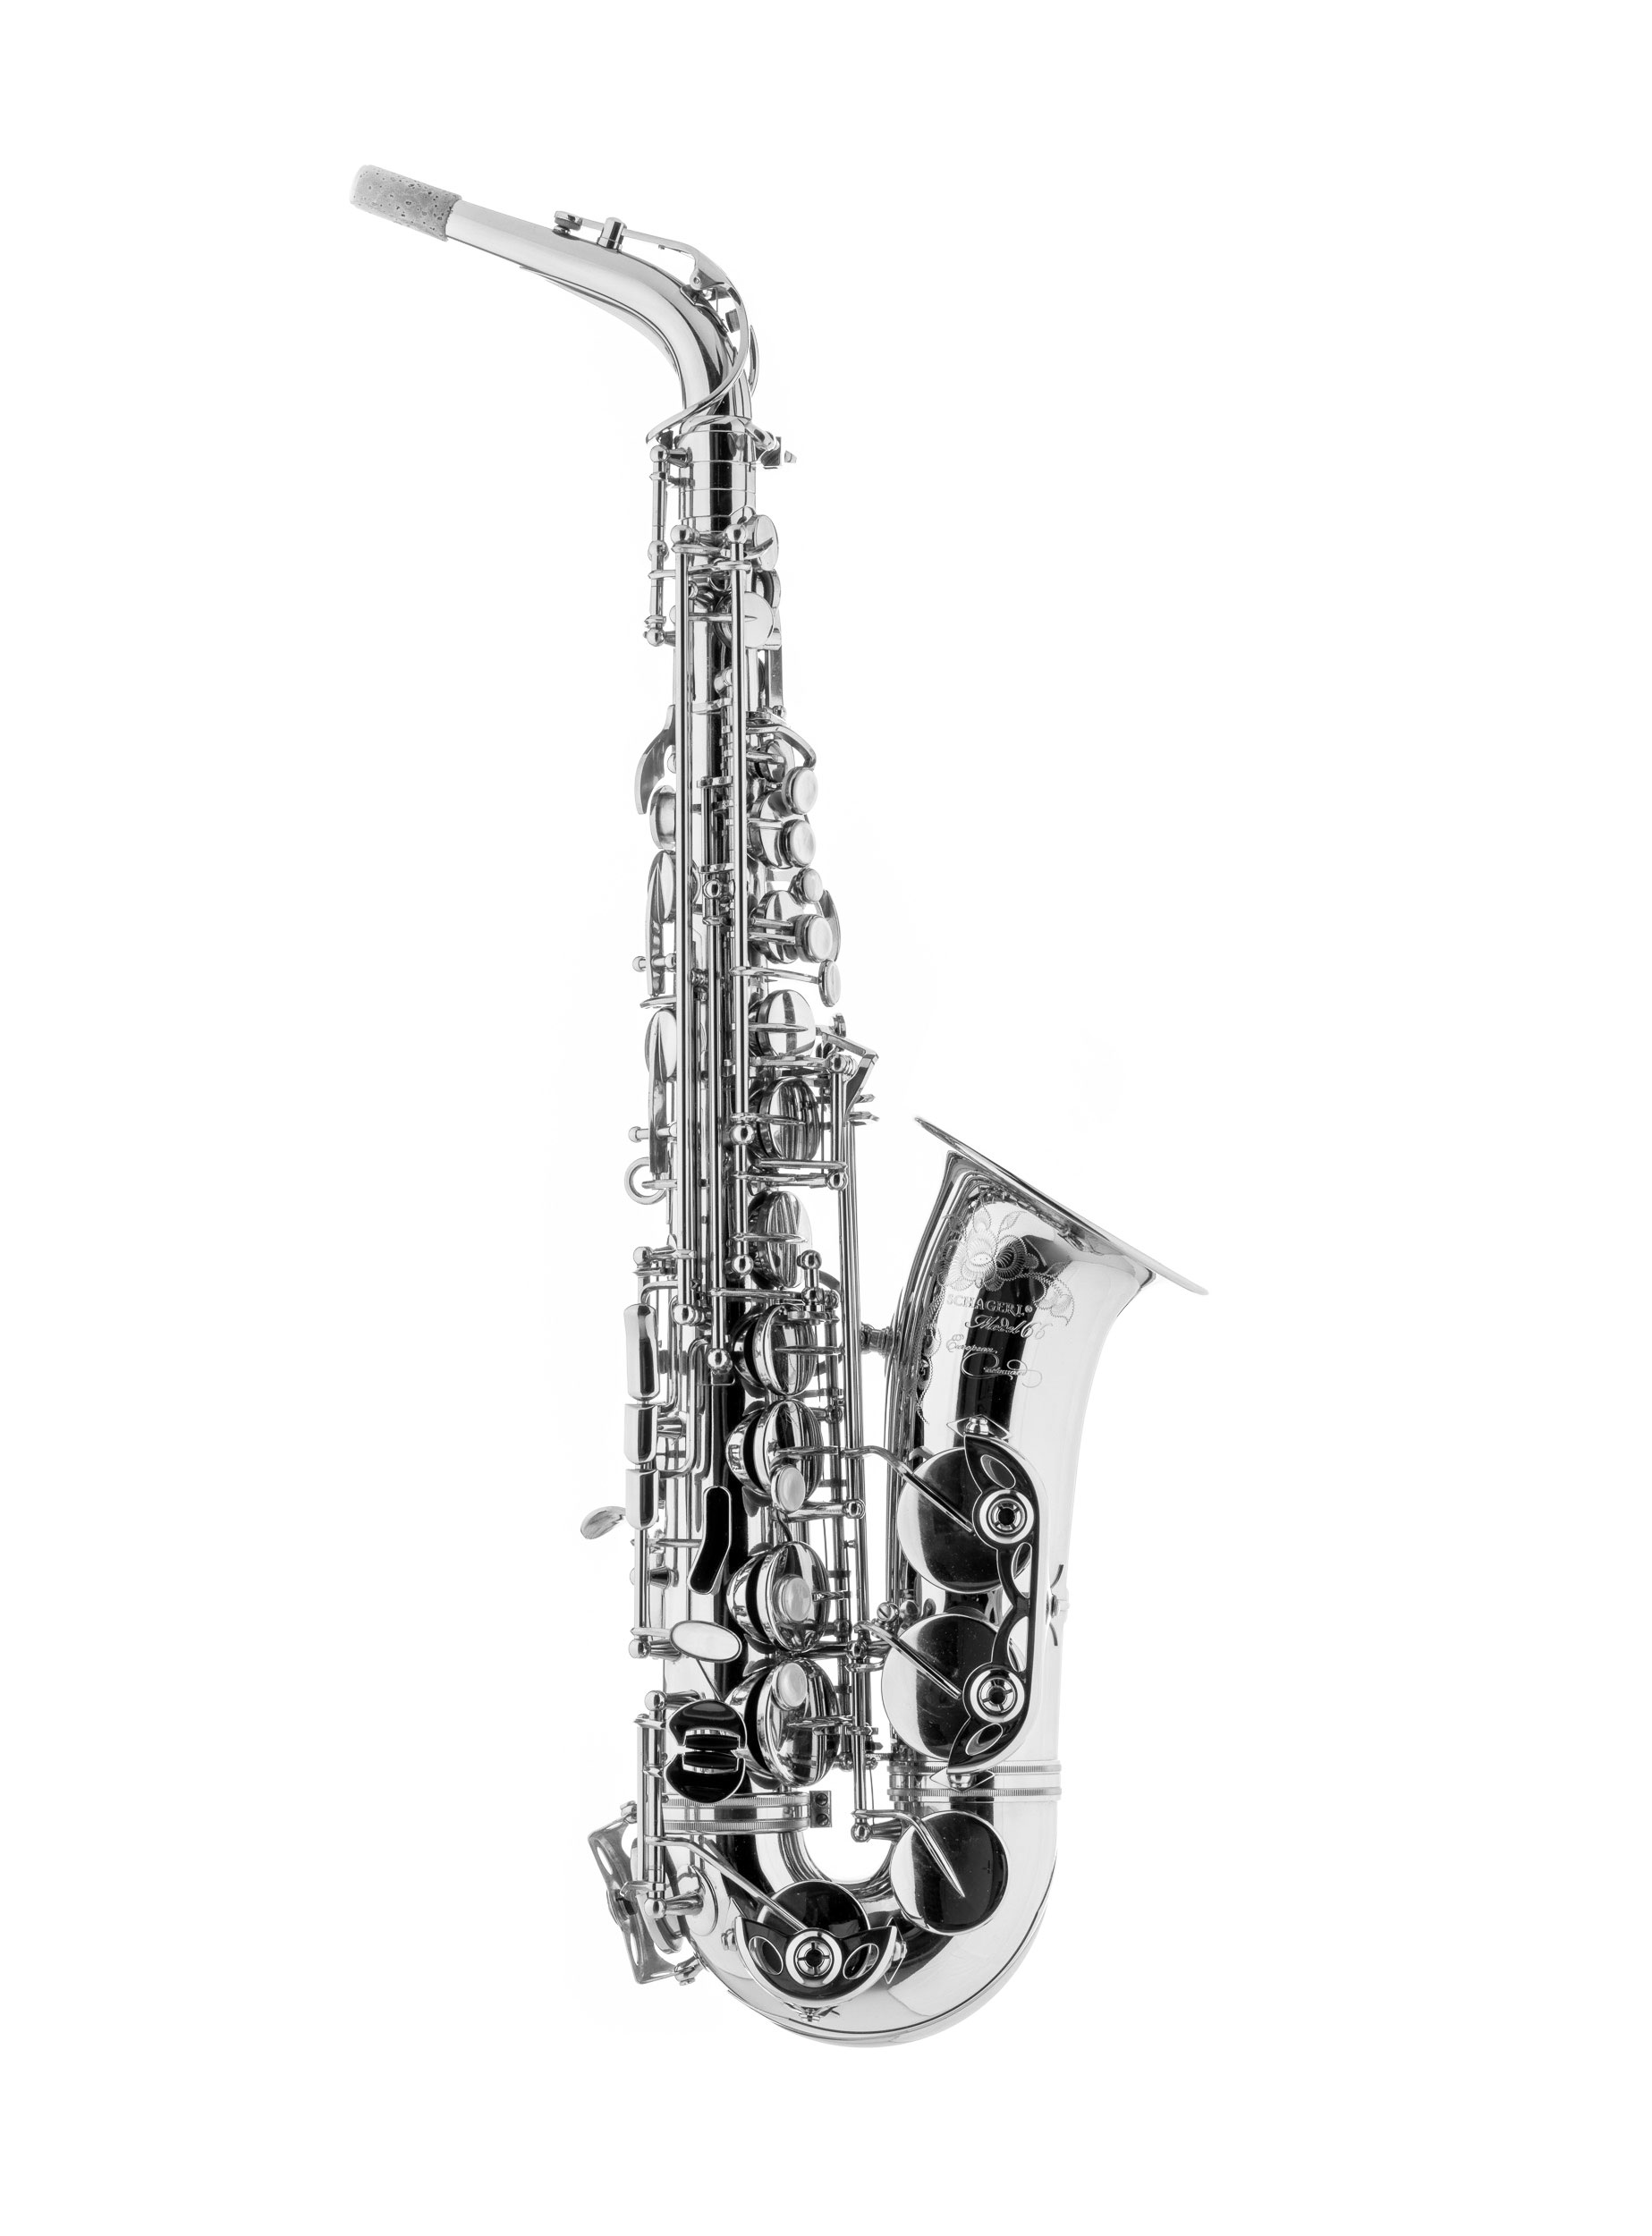 Schagerl Alto Saxophone "Model 66FS" silver plated